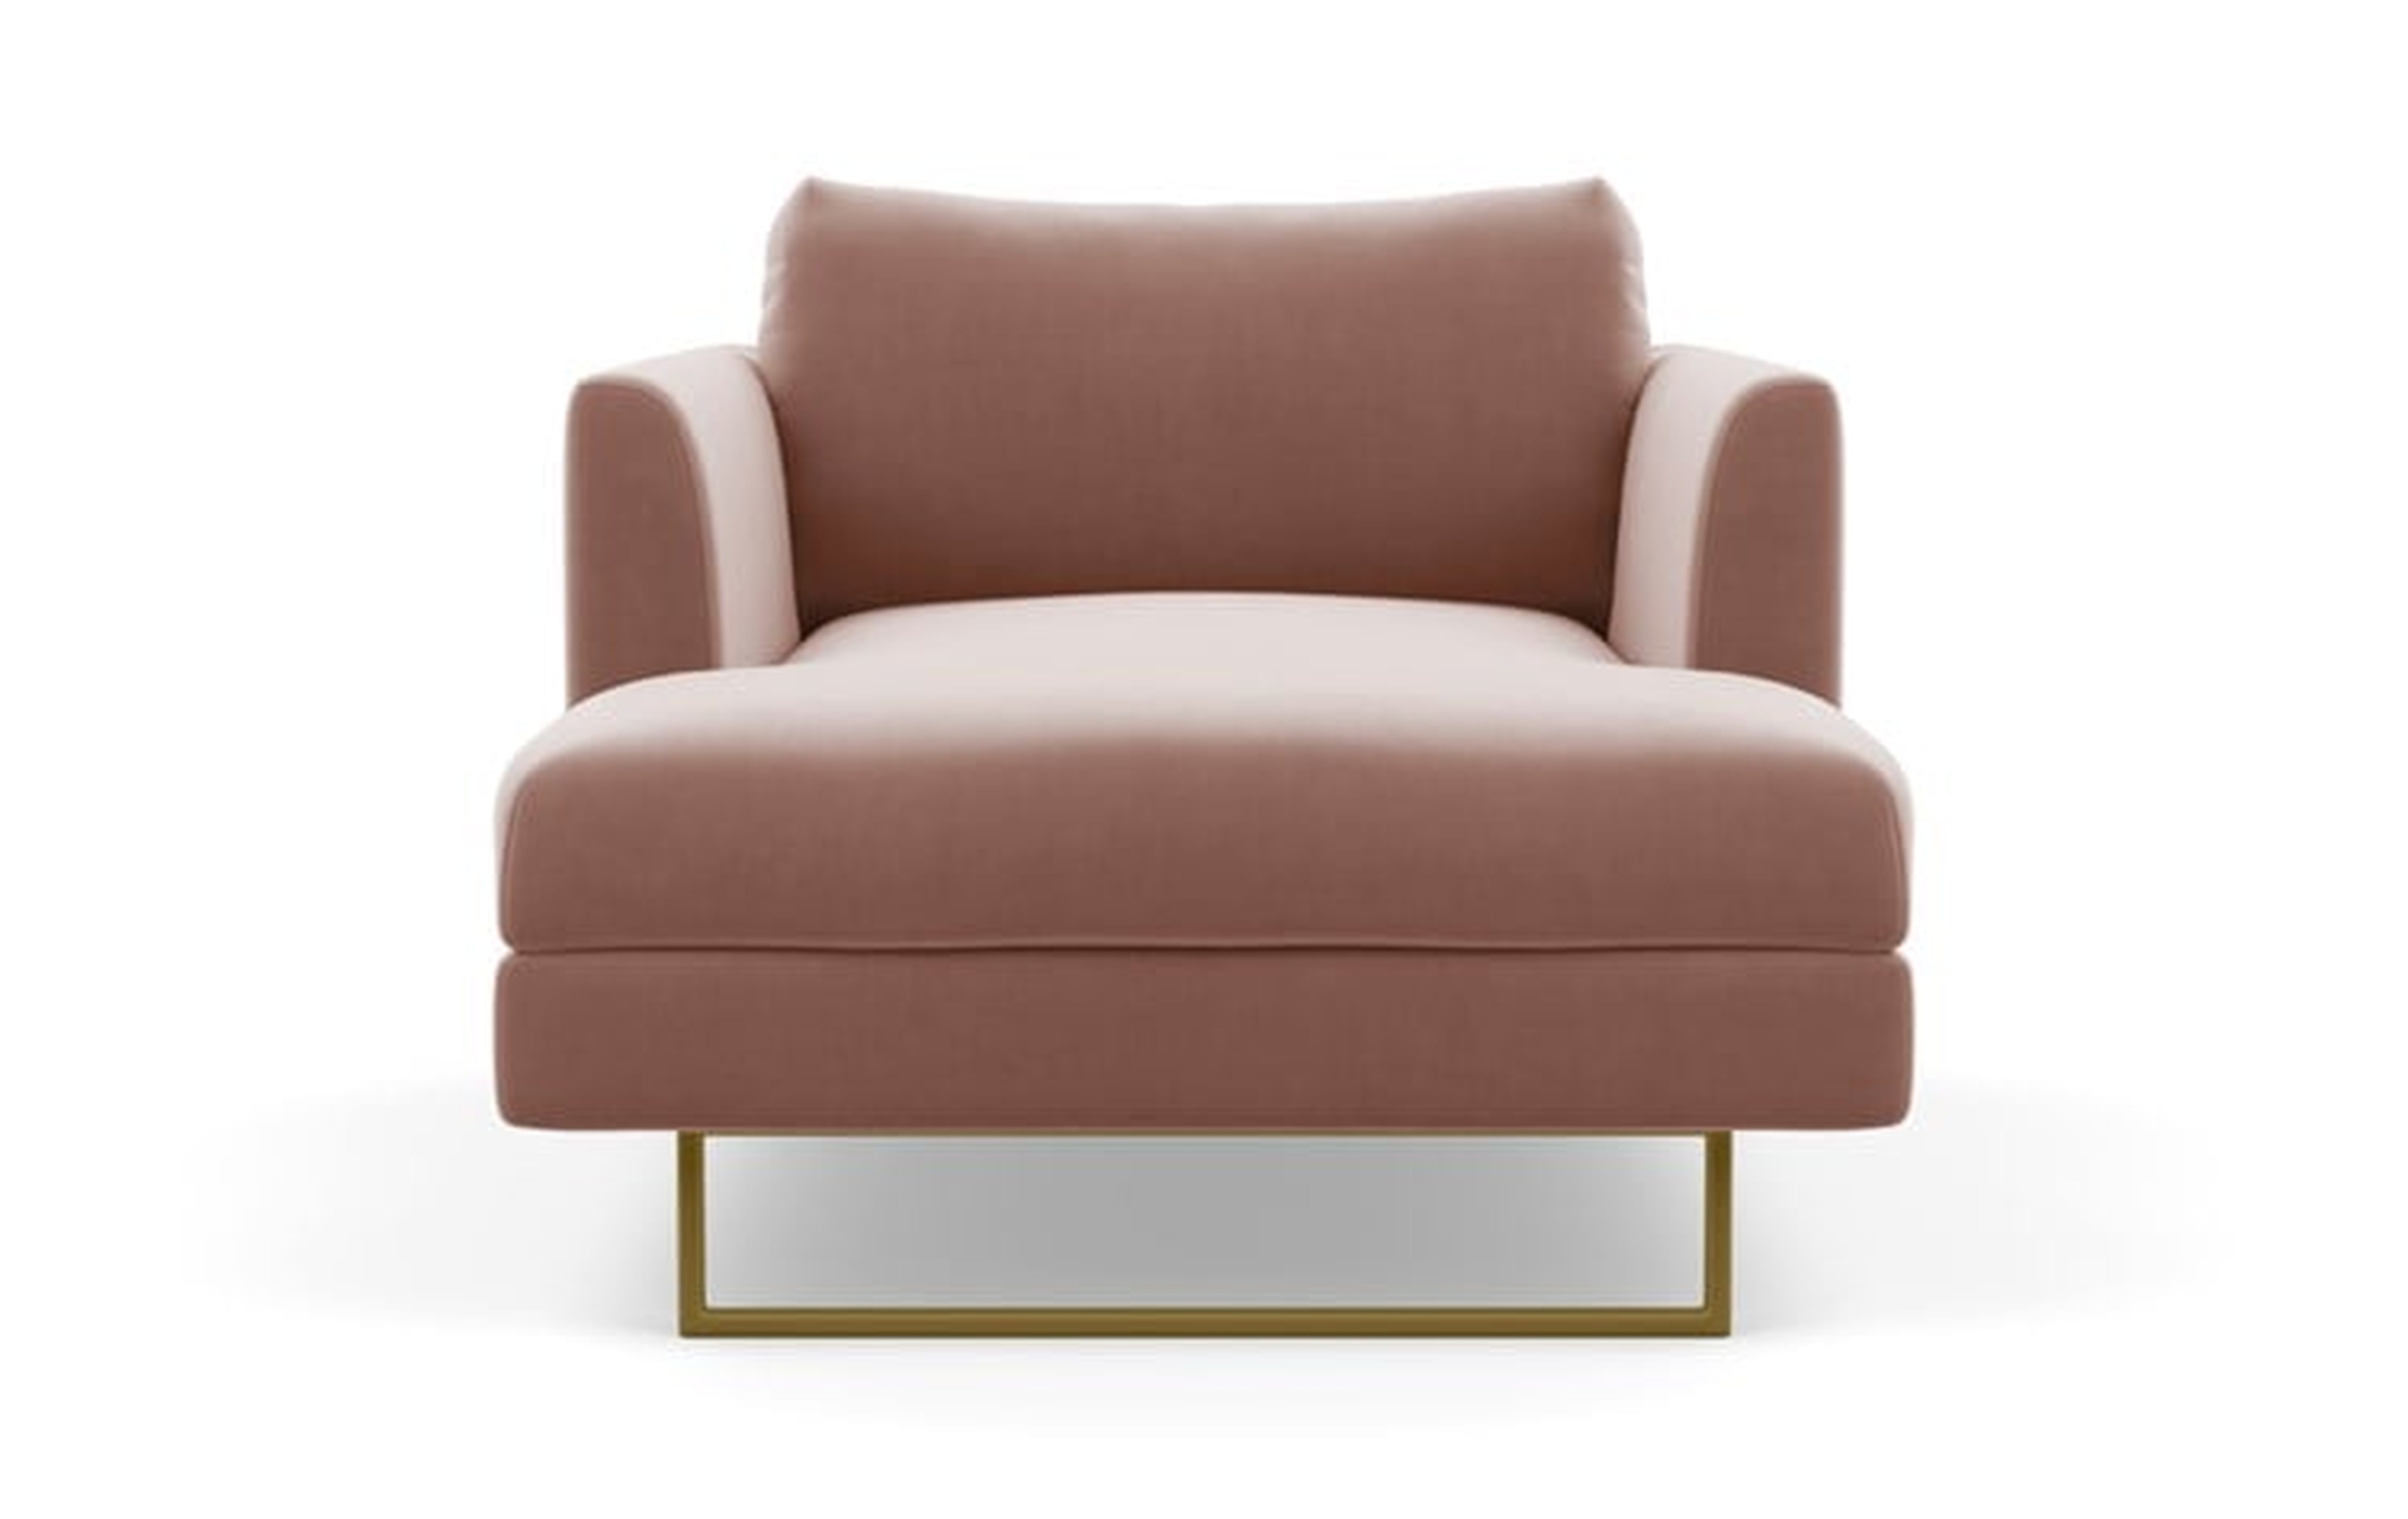 Owens Chaise Chaise Lounge with Pink Blush Fabric and Matte Brass legs - Interior Define